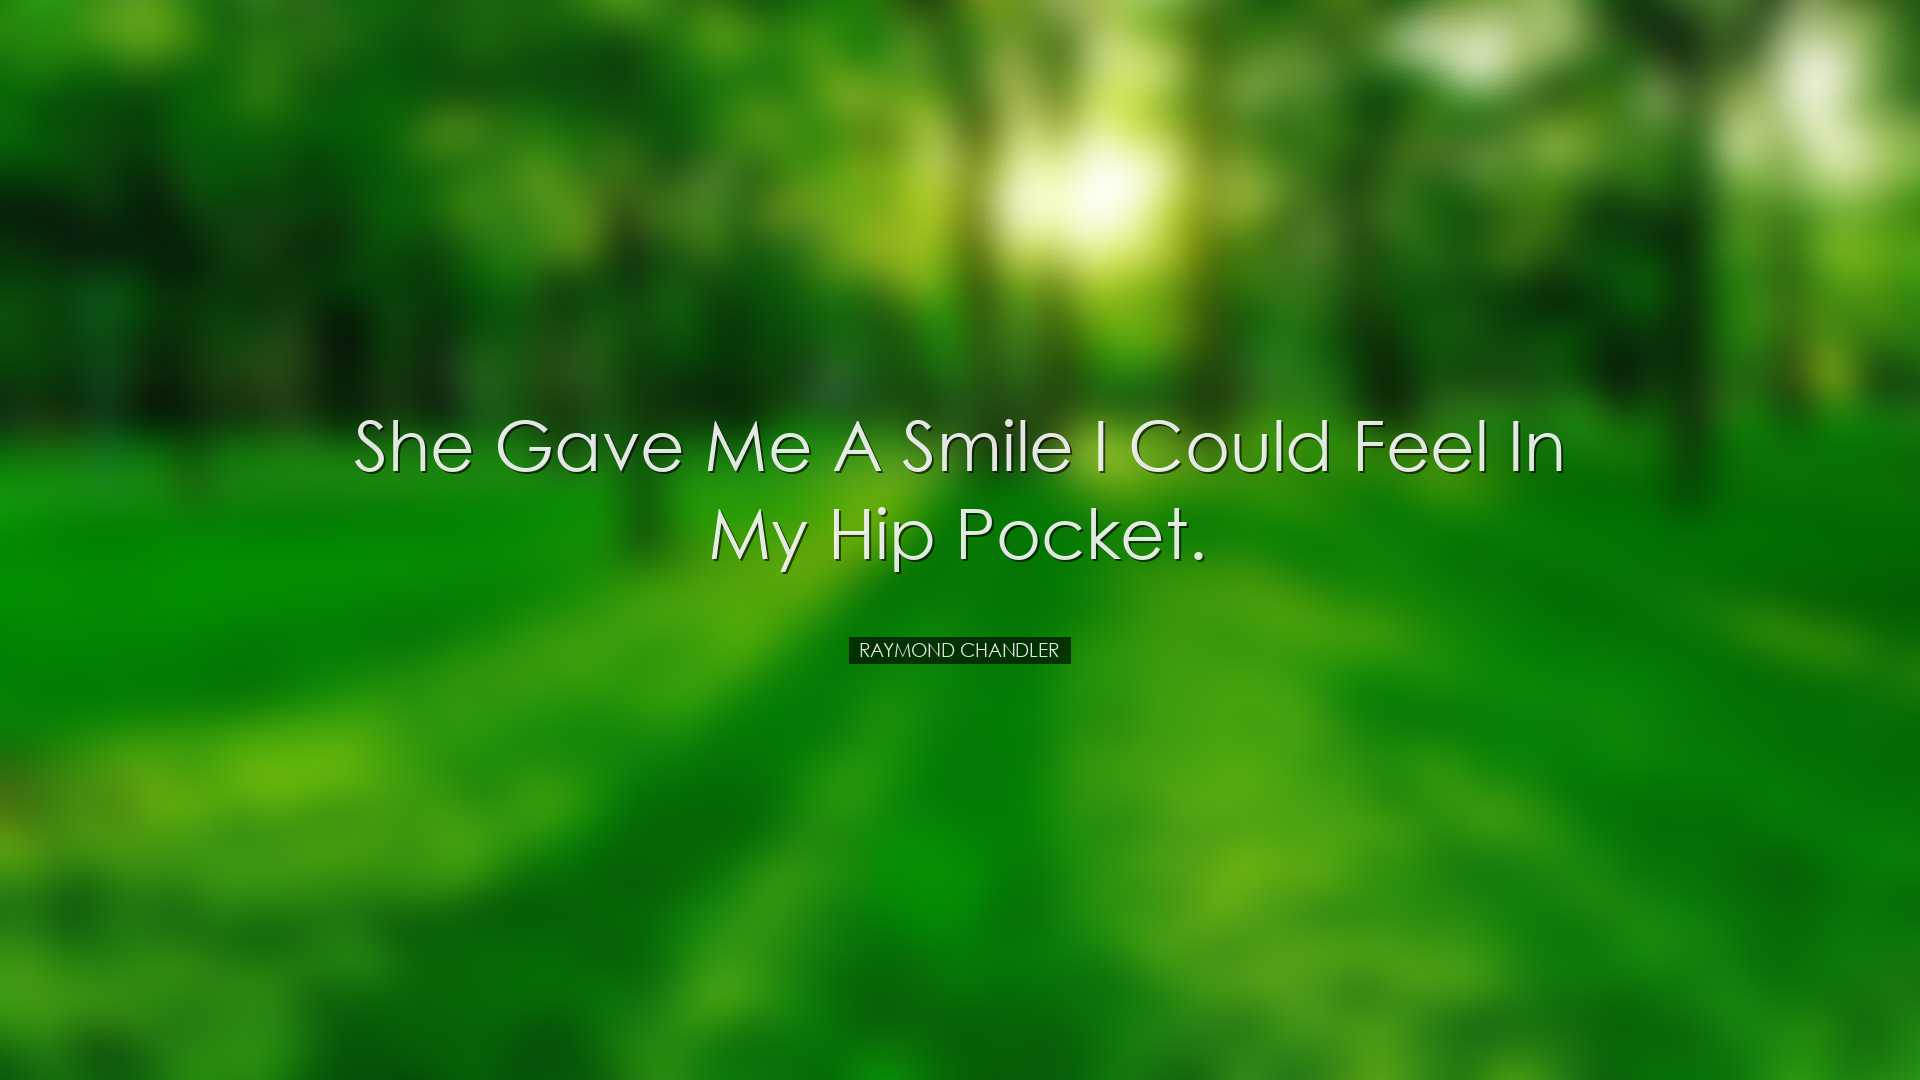 She gave me a smile I could feel in my hip pocket. - Raymond Chand